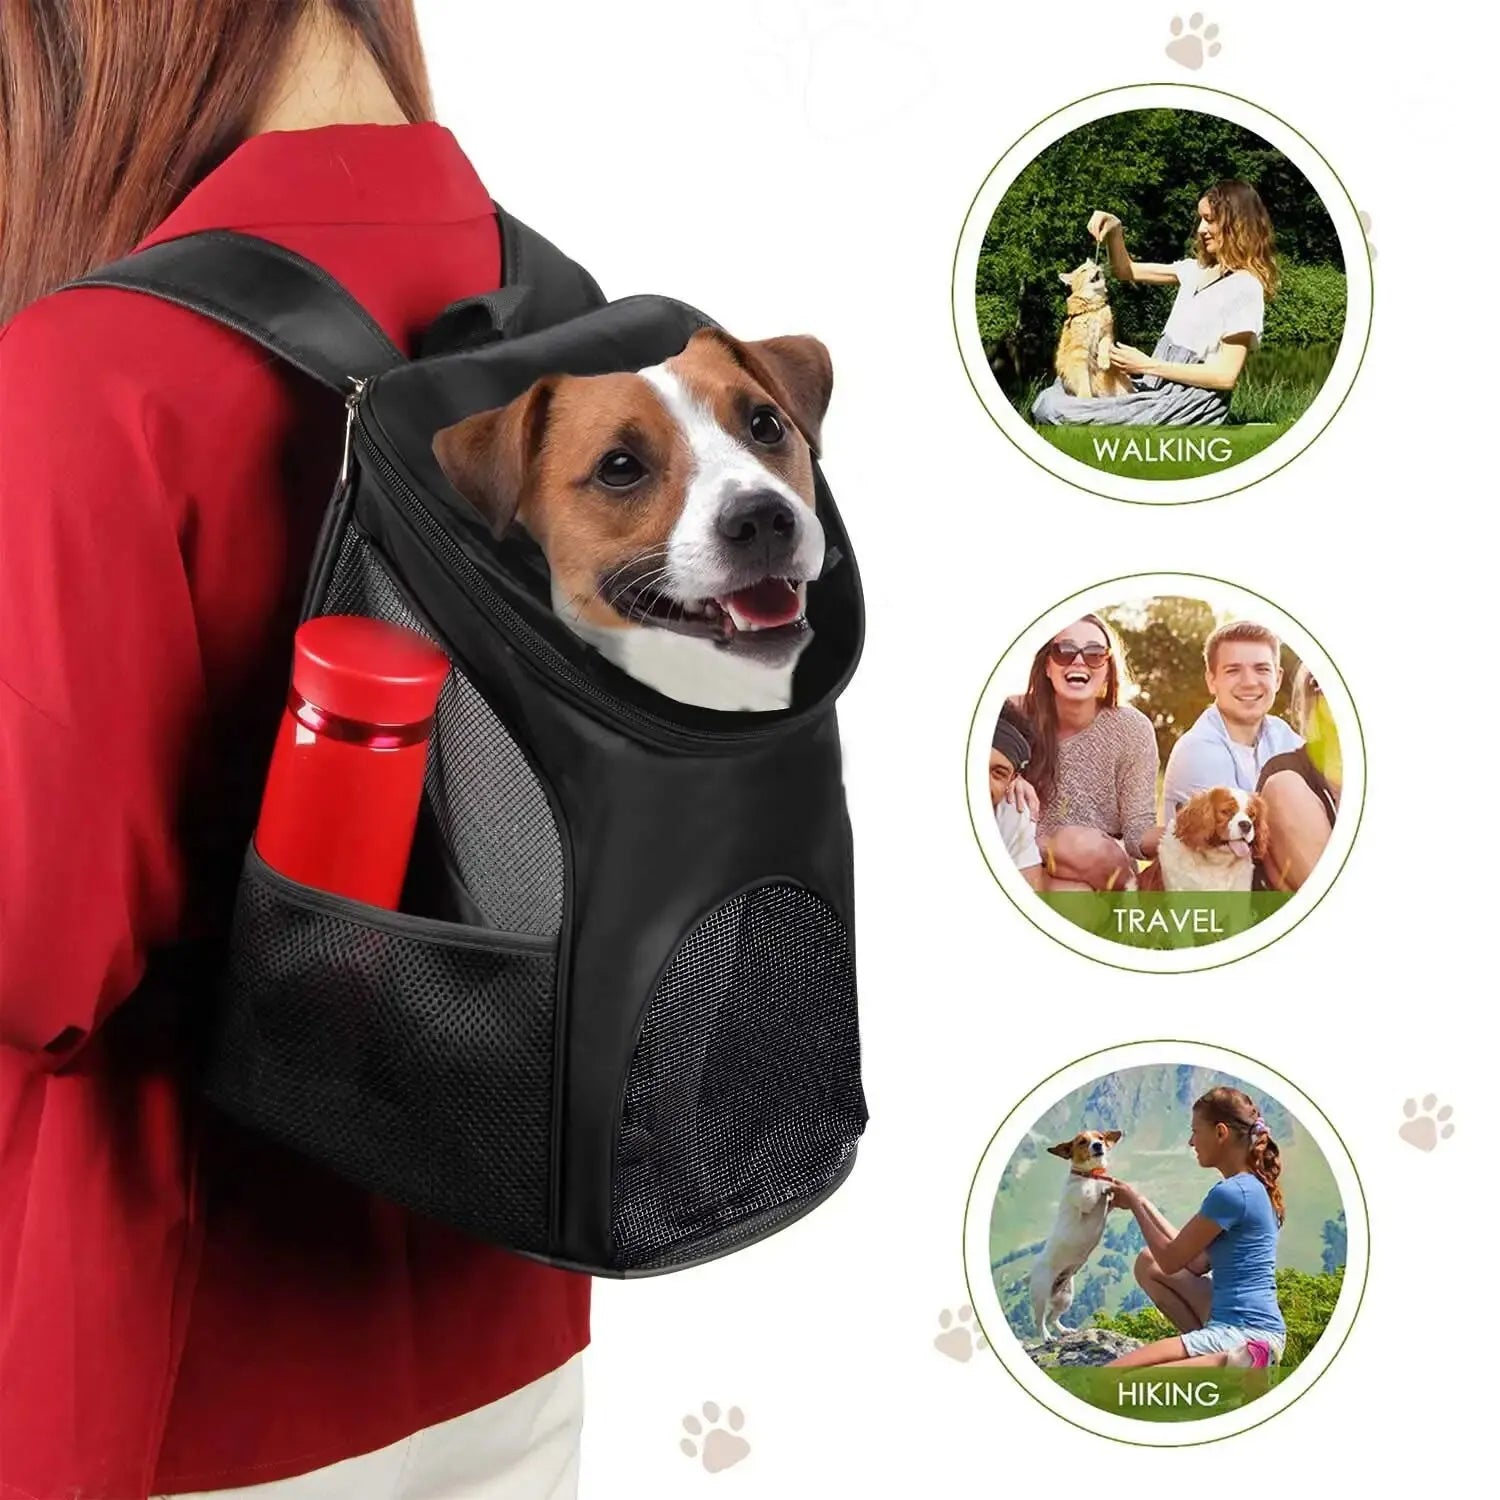 Ventilated Mesh Pet Carrier Backpack for Small Dogs and Cats  petlums.com   